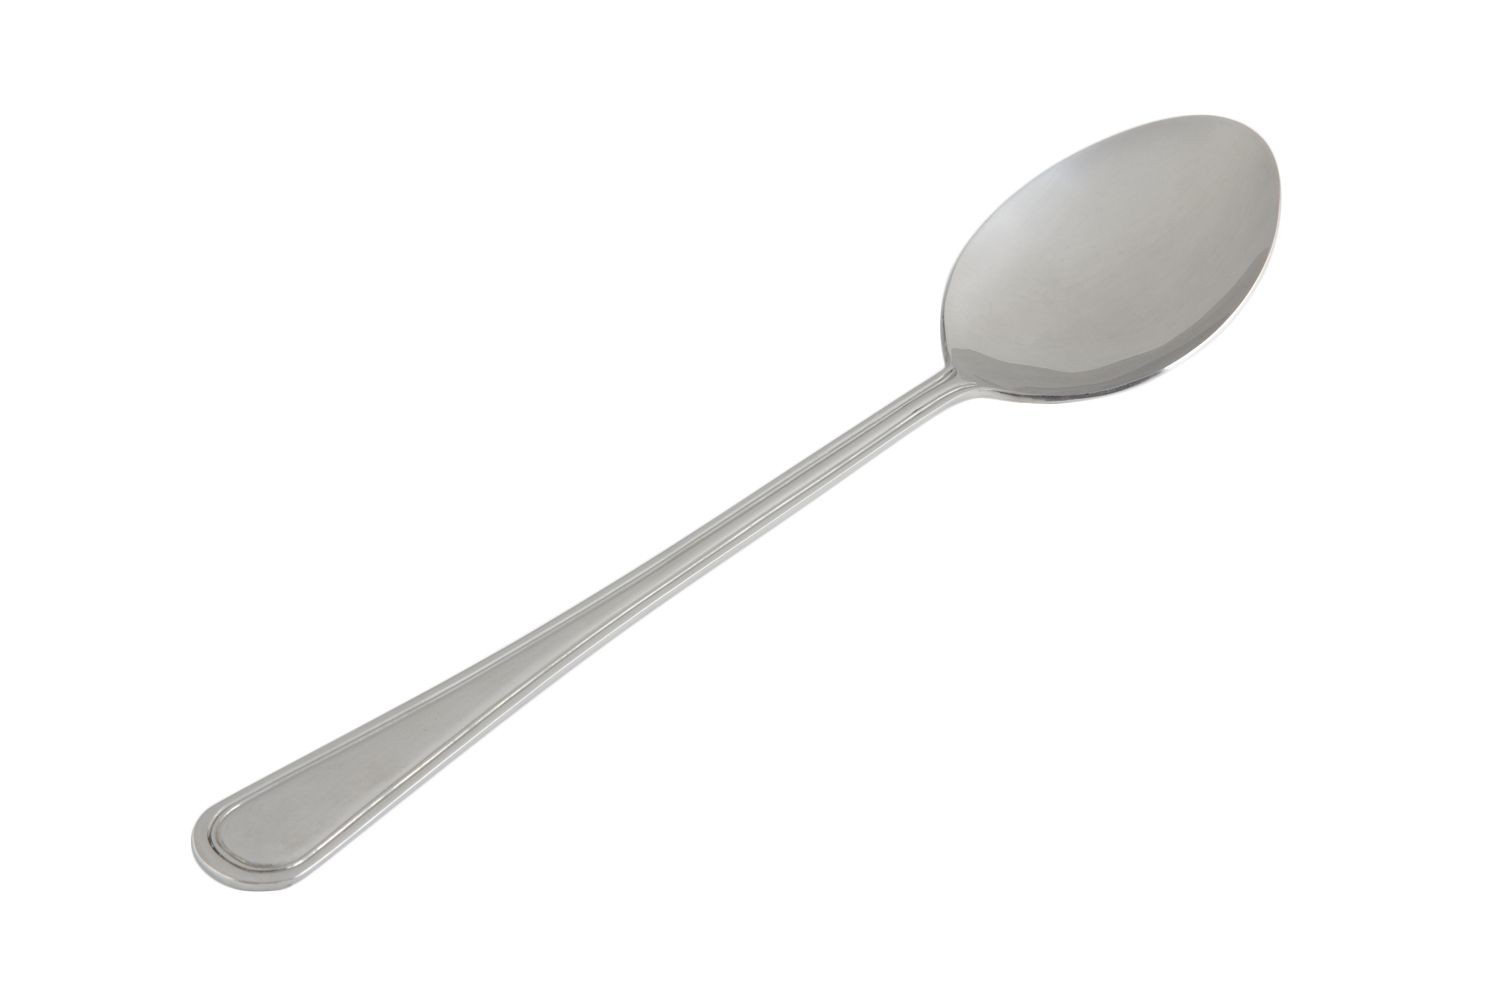 Bon Chef 9451 Stainless Steel Banquet Serving Spoon, 12 1/2"